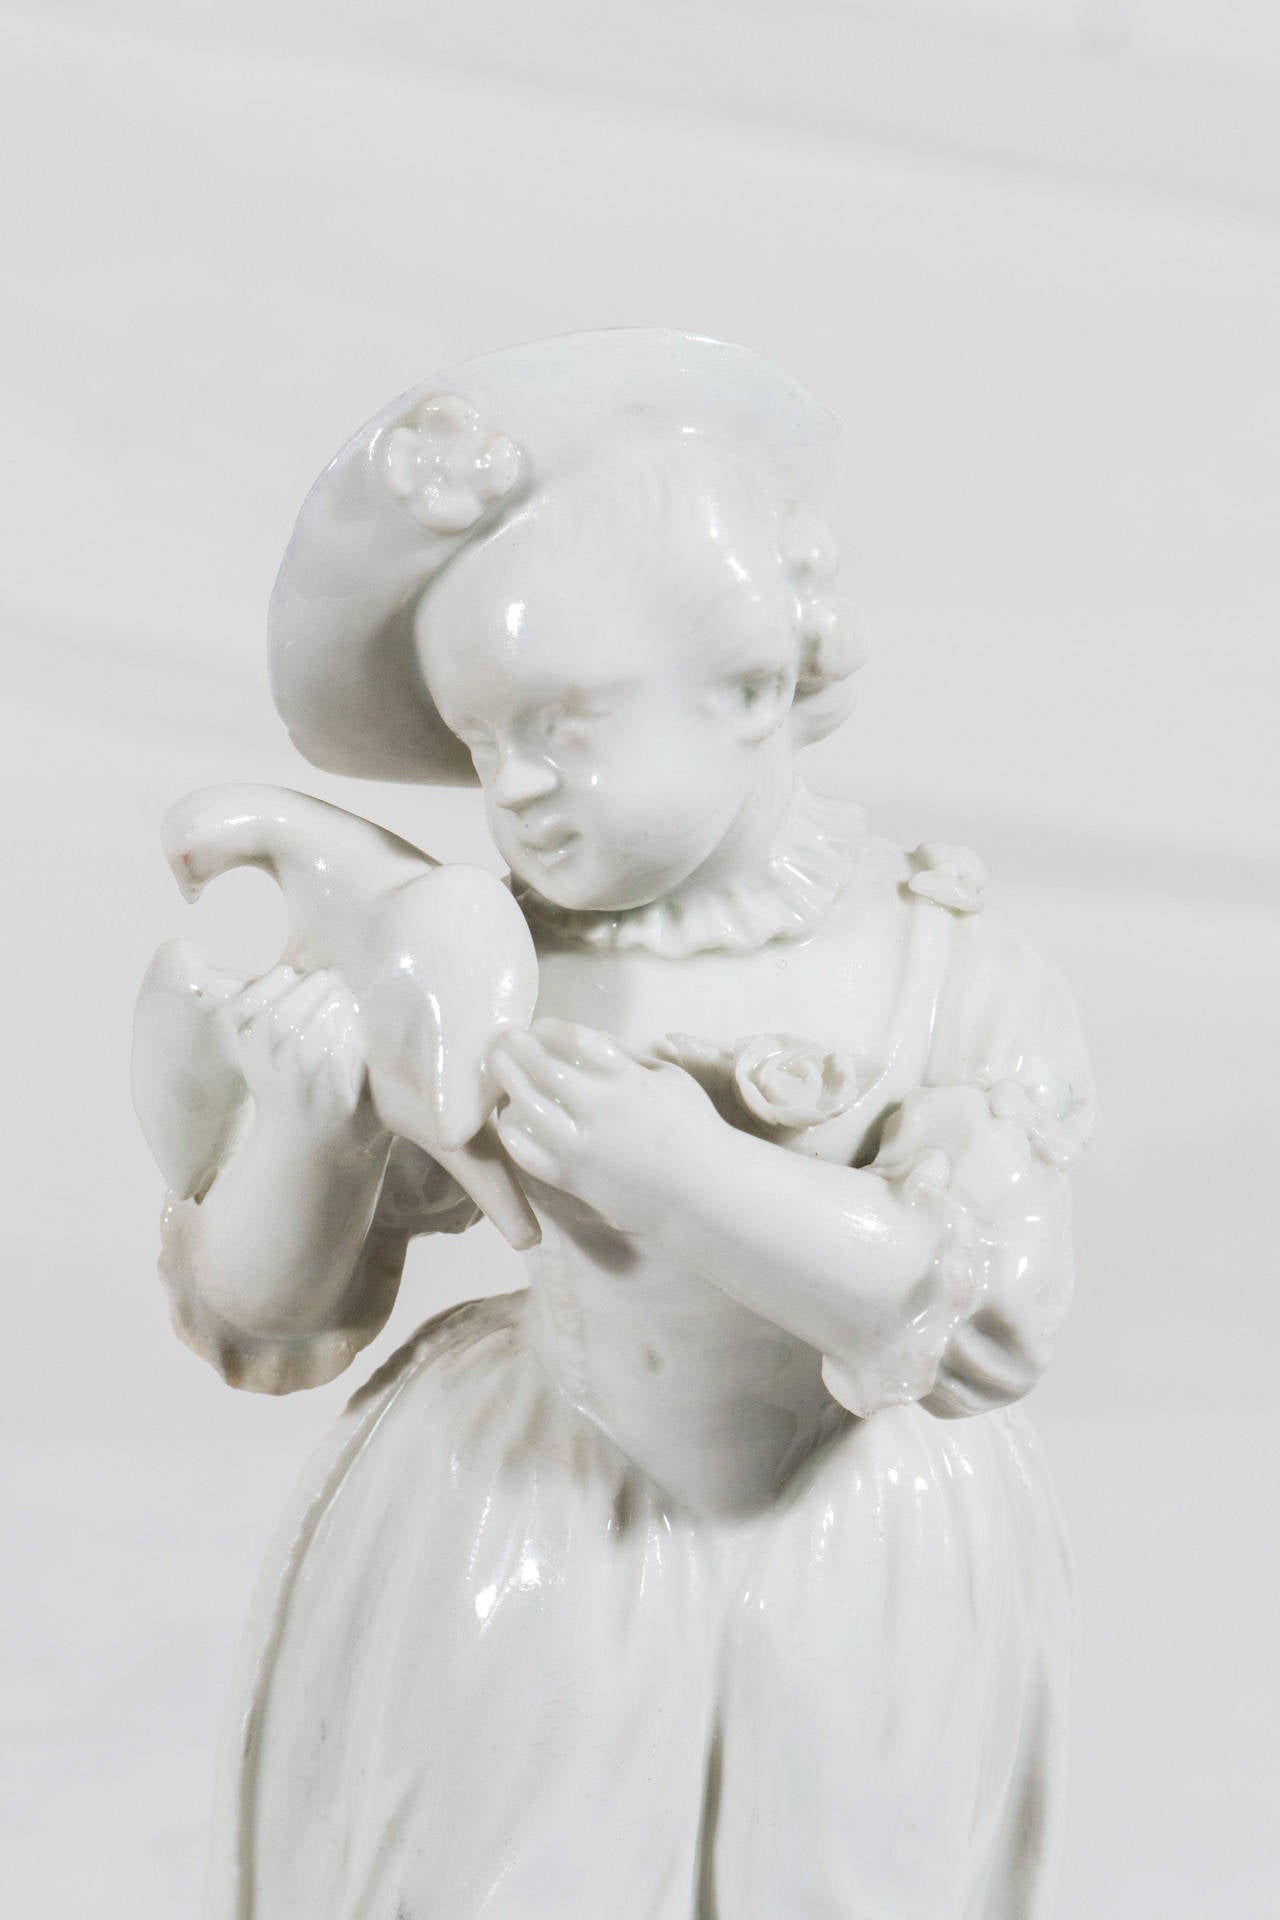 A mid-18th century Frankenthal porcelain figure of a young girl dressed in period costume holding a dove. She is posed with her head tilting to the right, the right leg slightly forward, the bird cradled in her right arm.